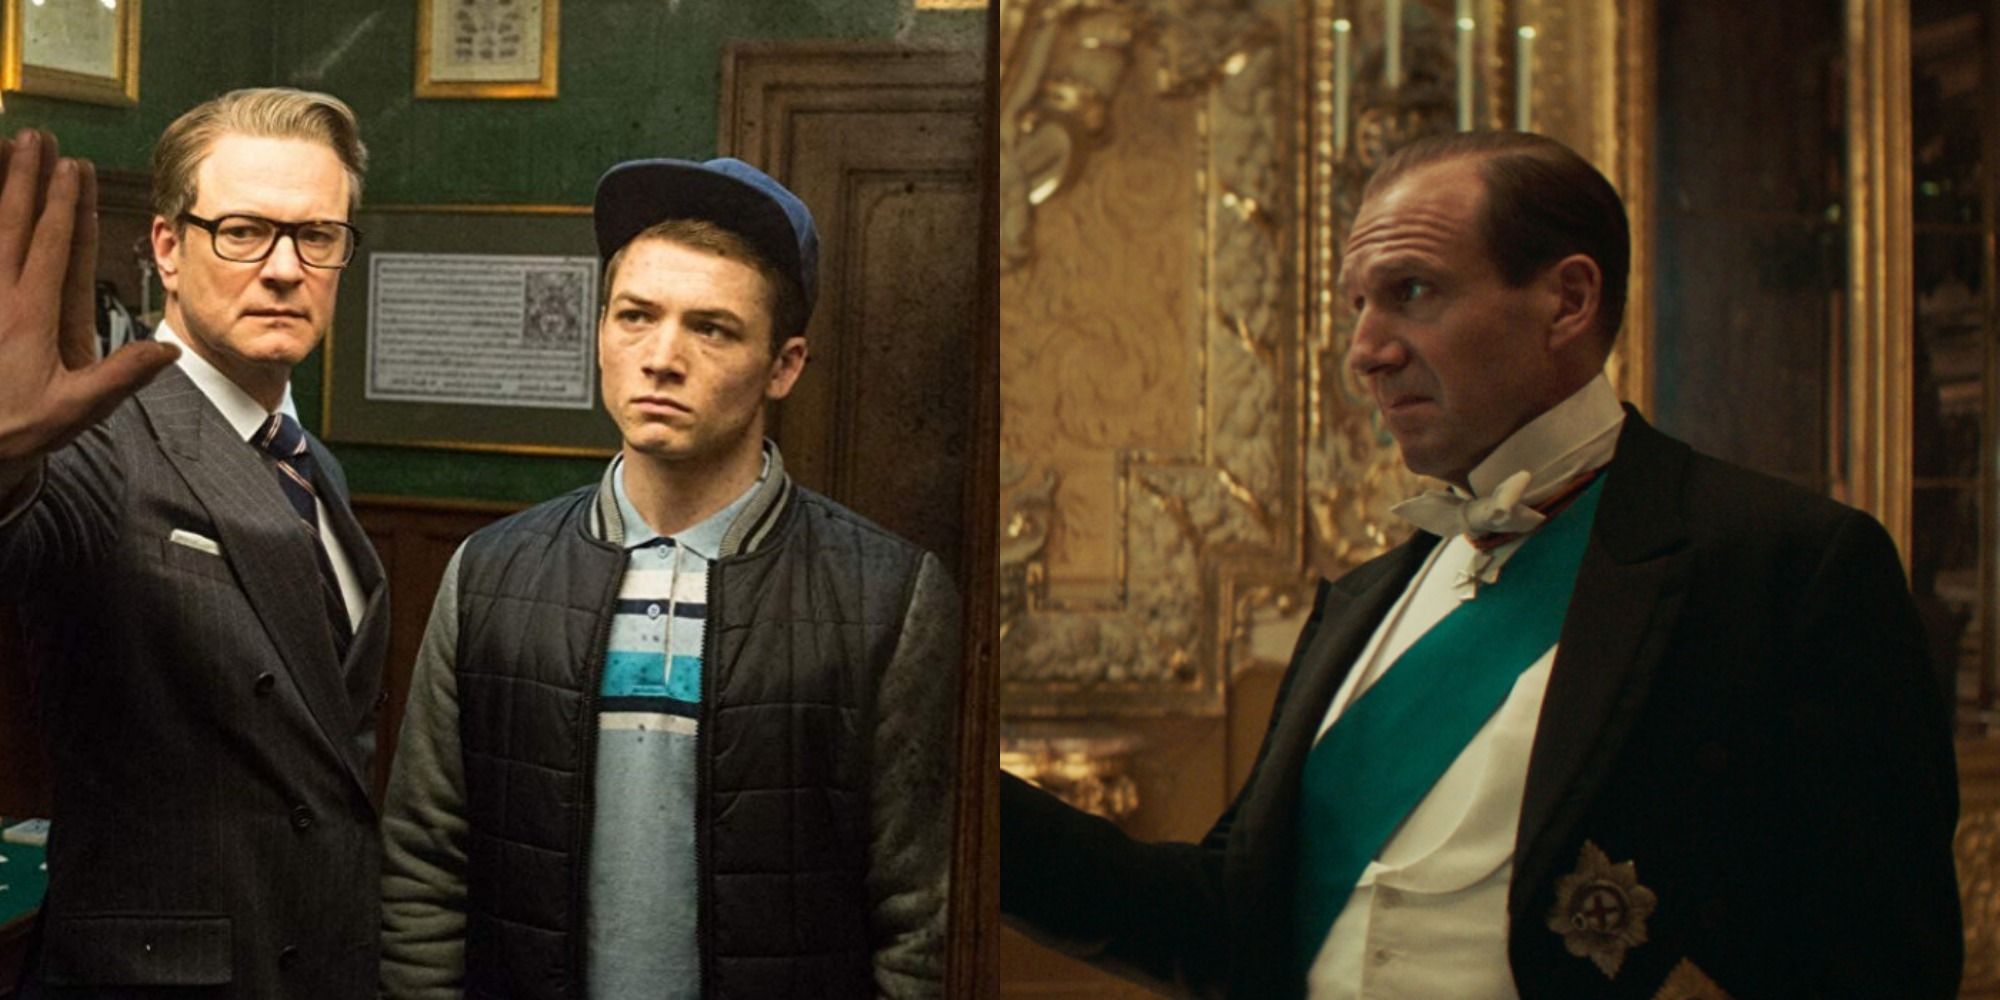 Colin Firth and Taron Egerton in Kingsman: The Secret Service and Ralph Fiennes in The King's Man